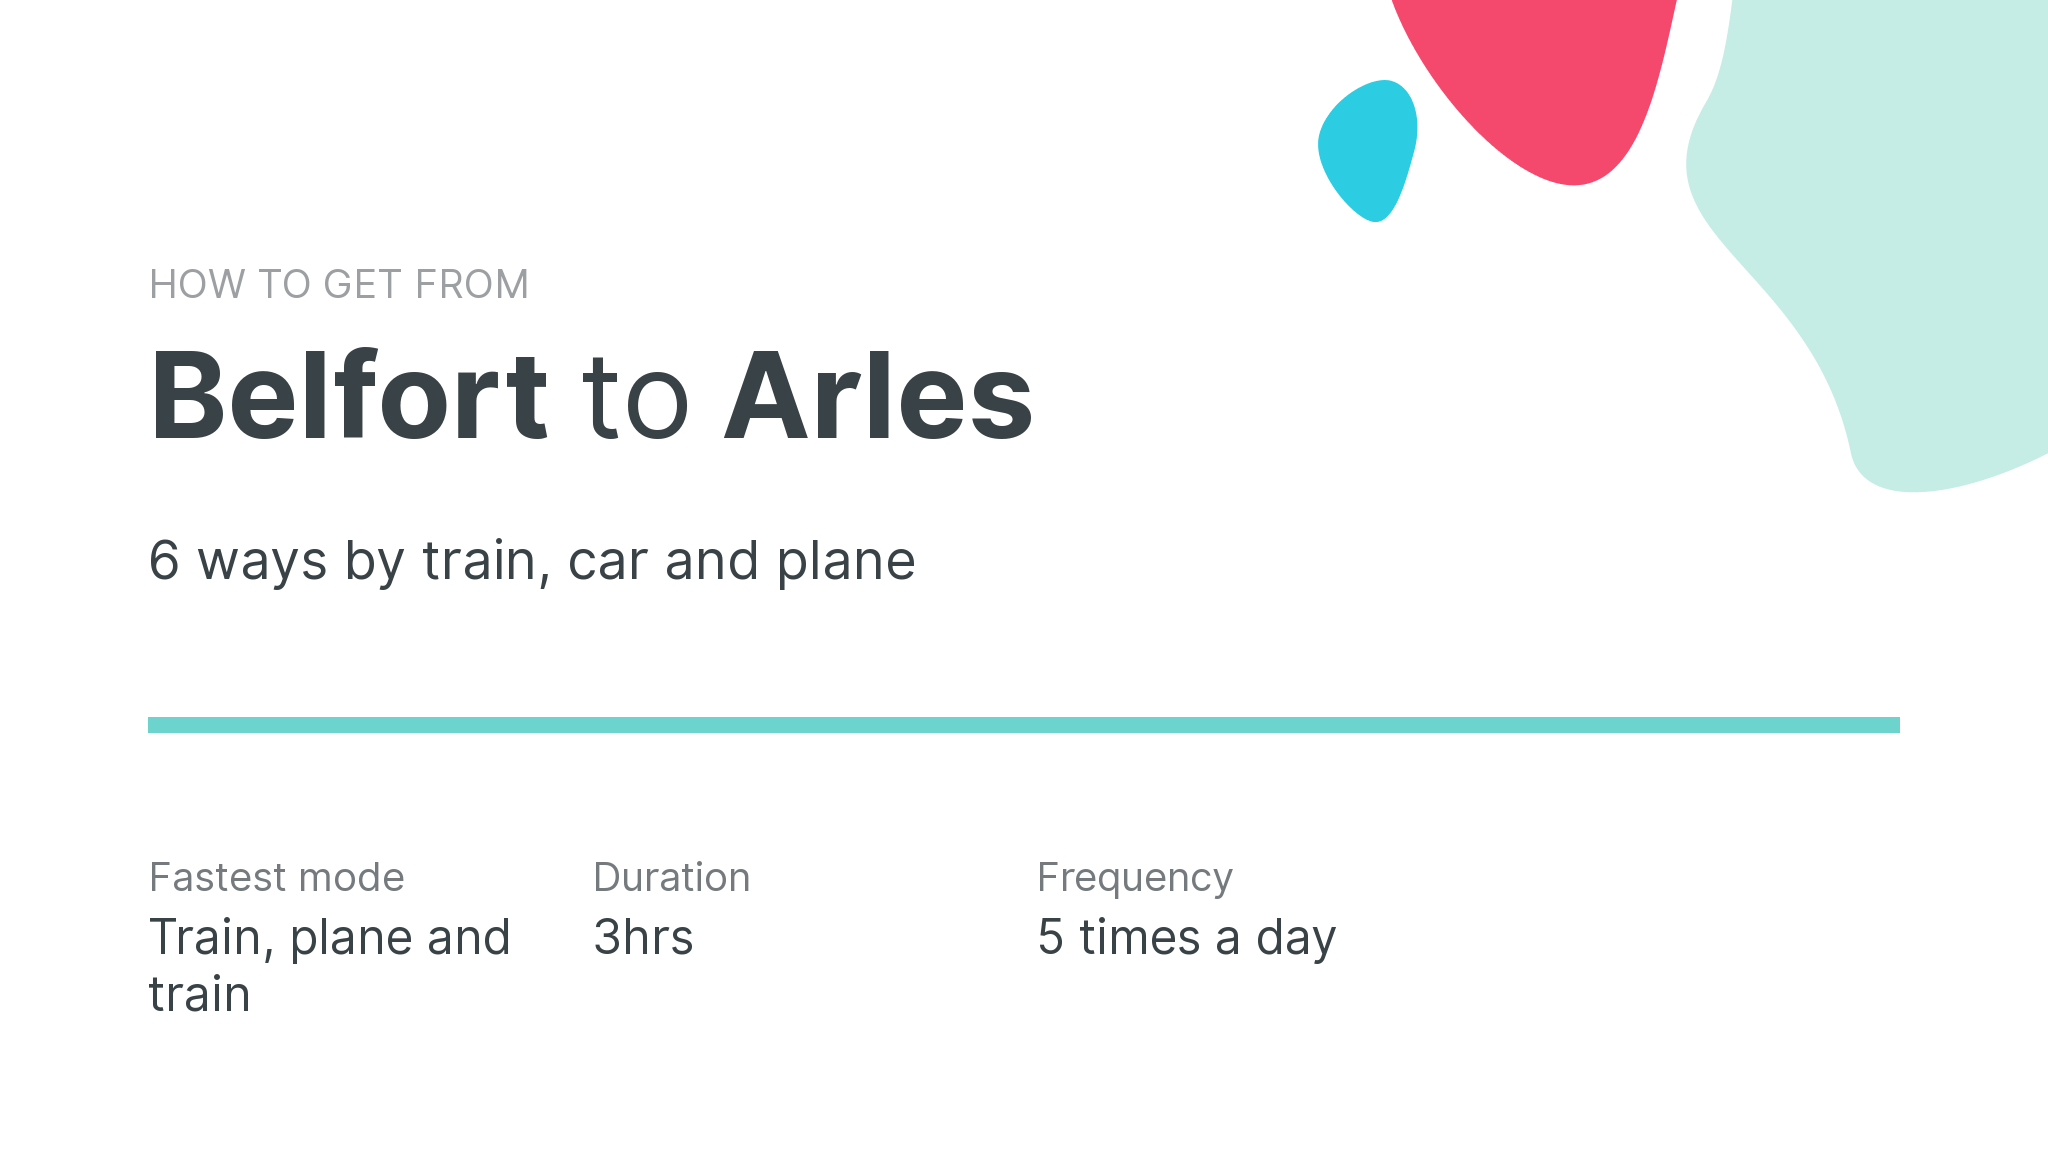 How do I get from Belfort to Arles